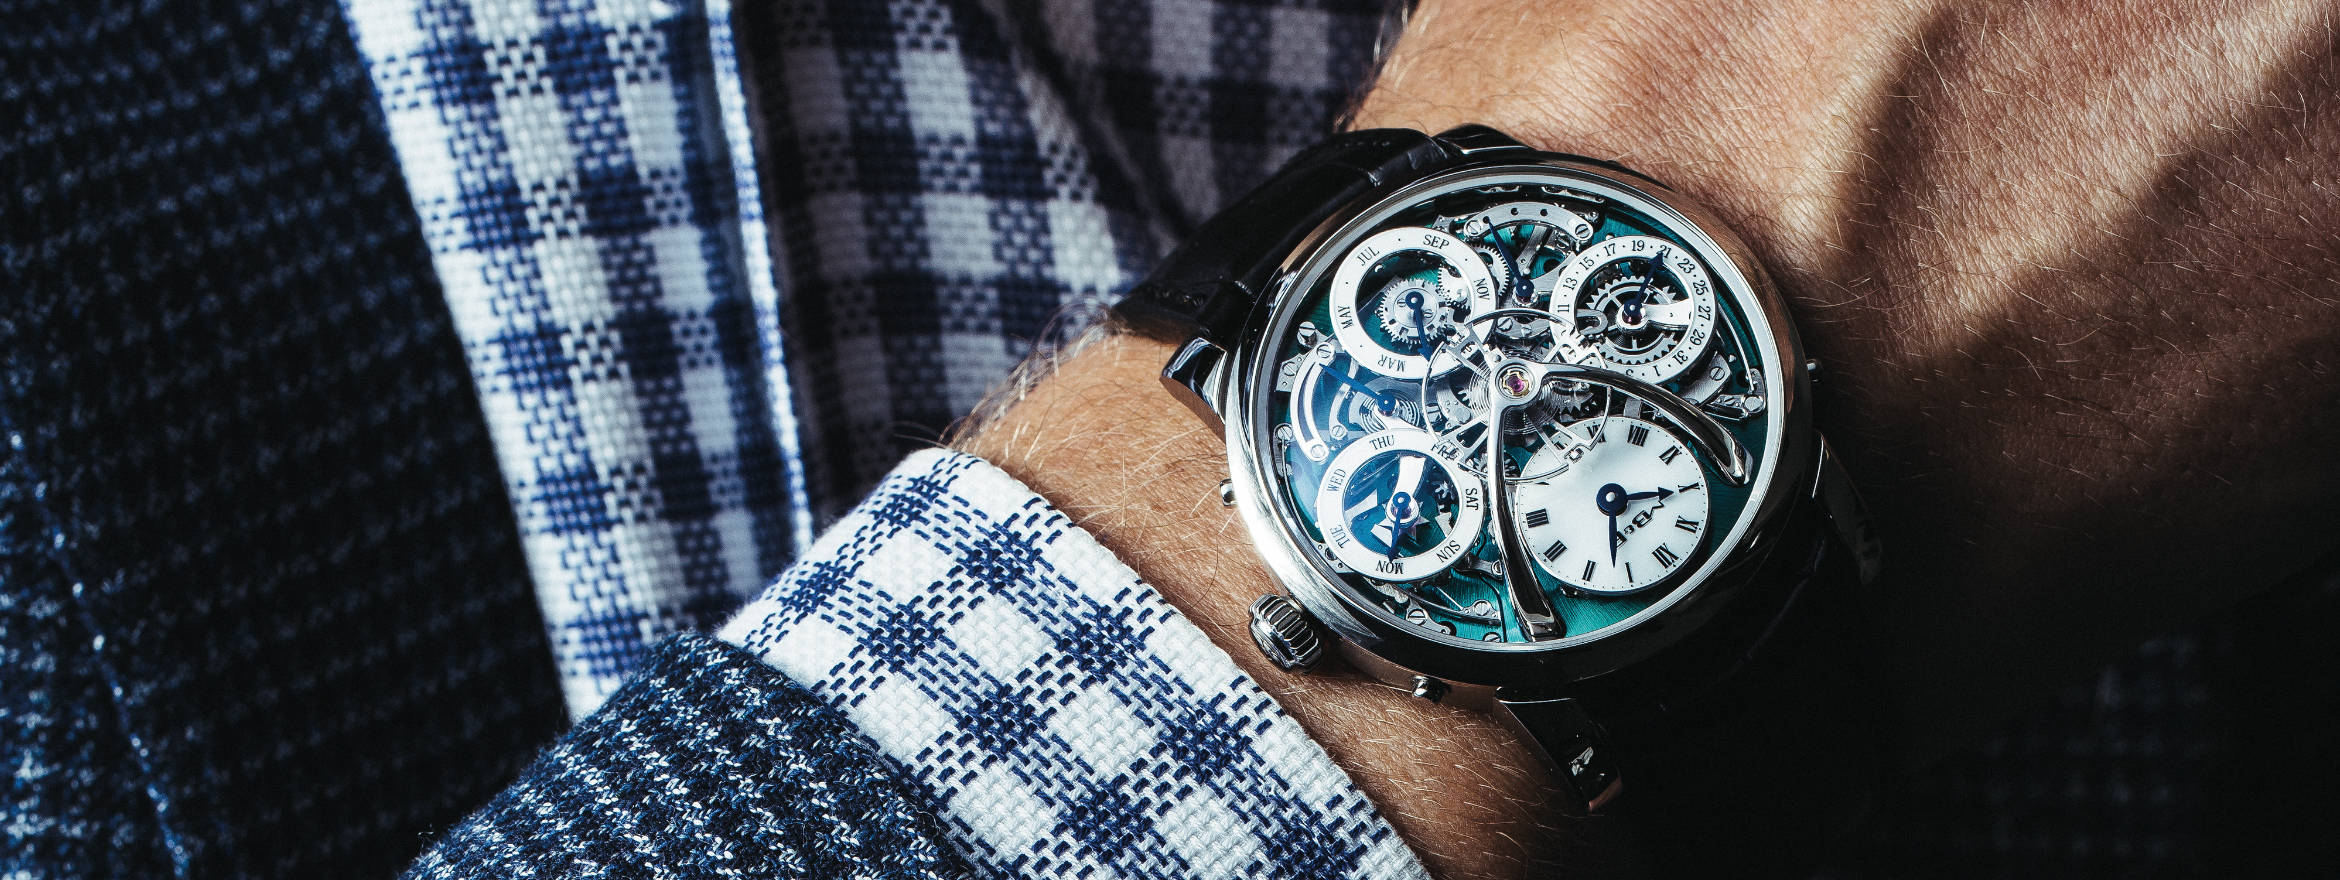 MB&F LM Perpetual Explained By Max Büsser